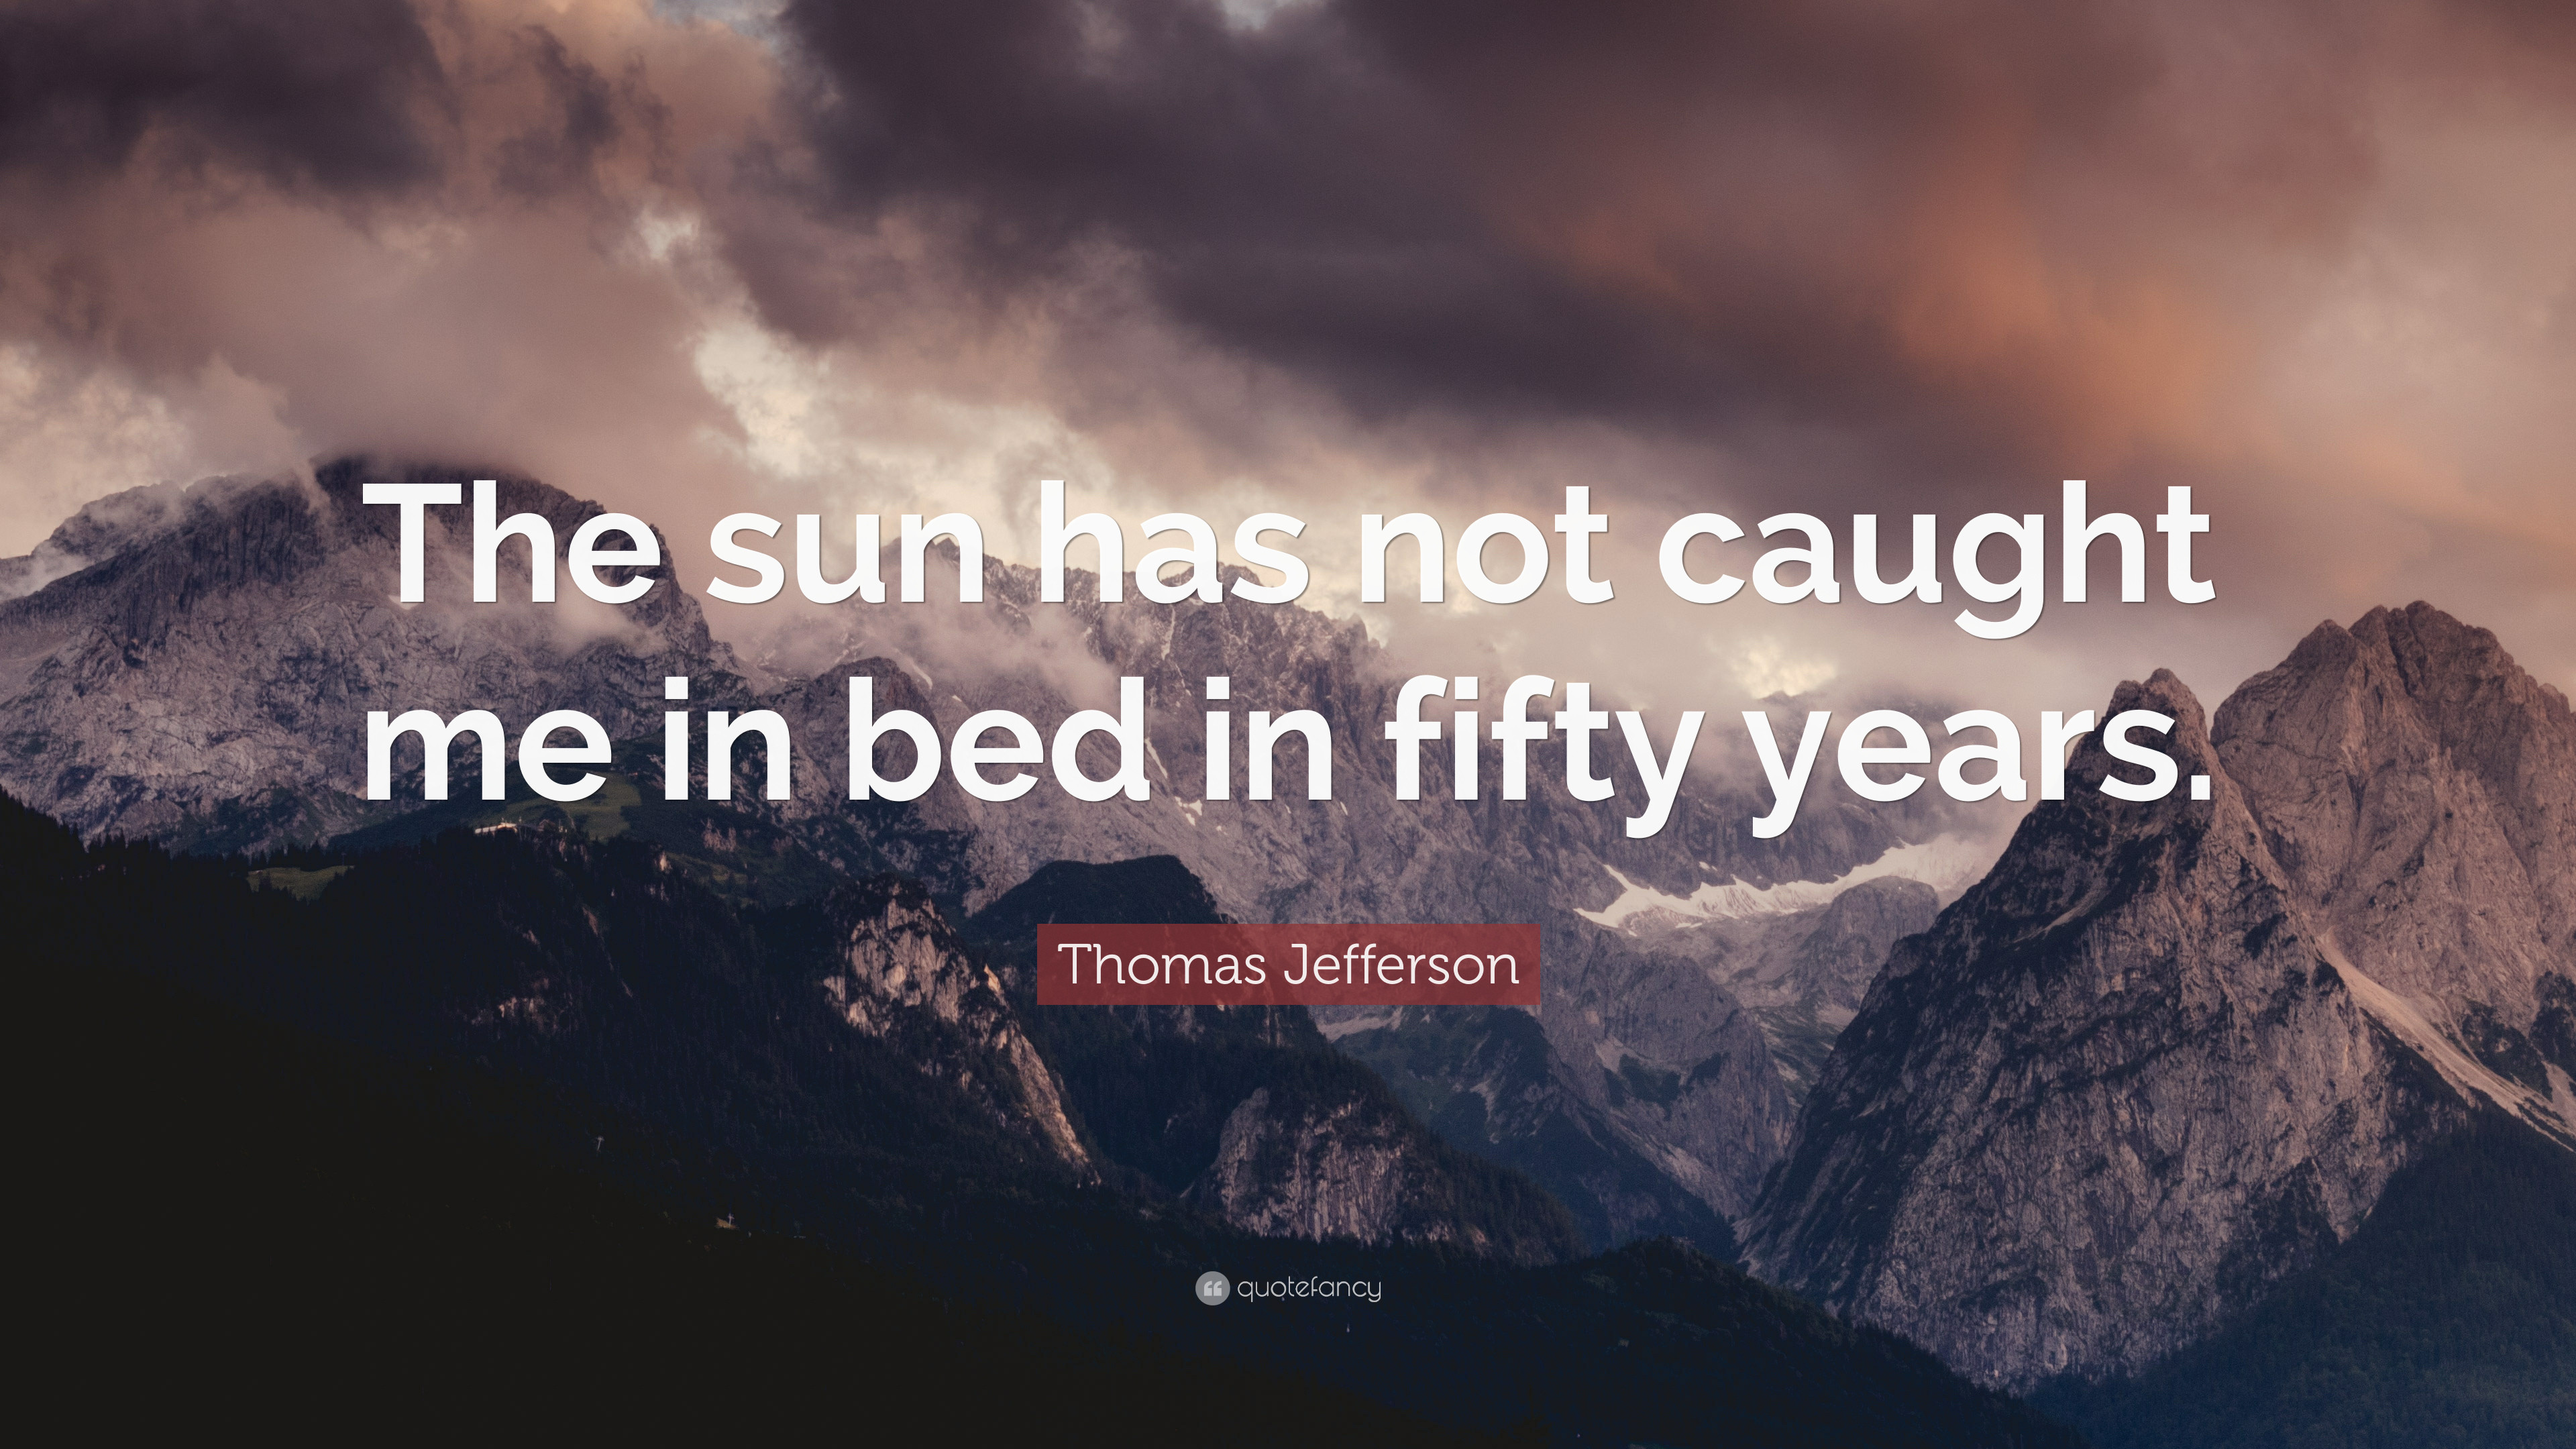 3840x2160 Thomas Jefferson Quote: “The sun has not caught me in bed in fifty years